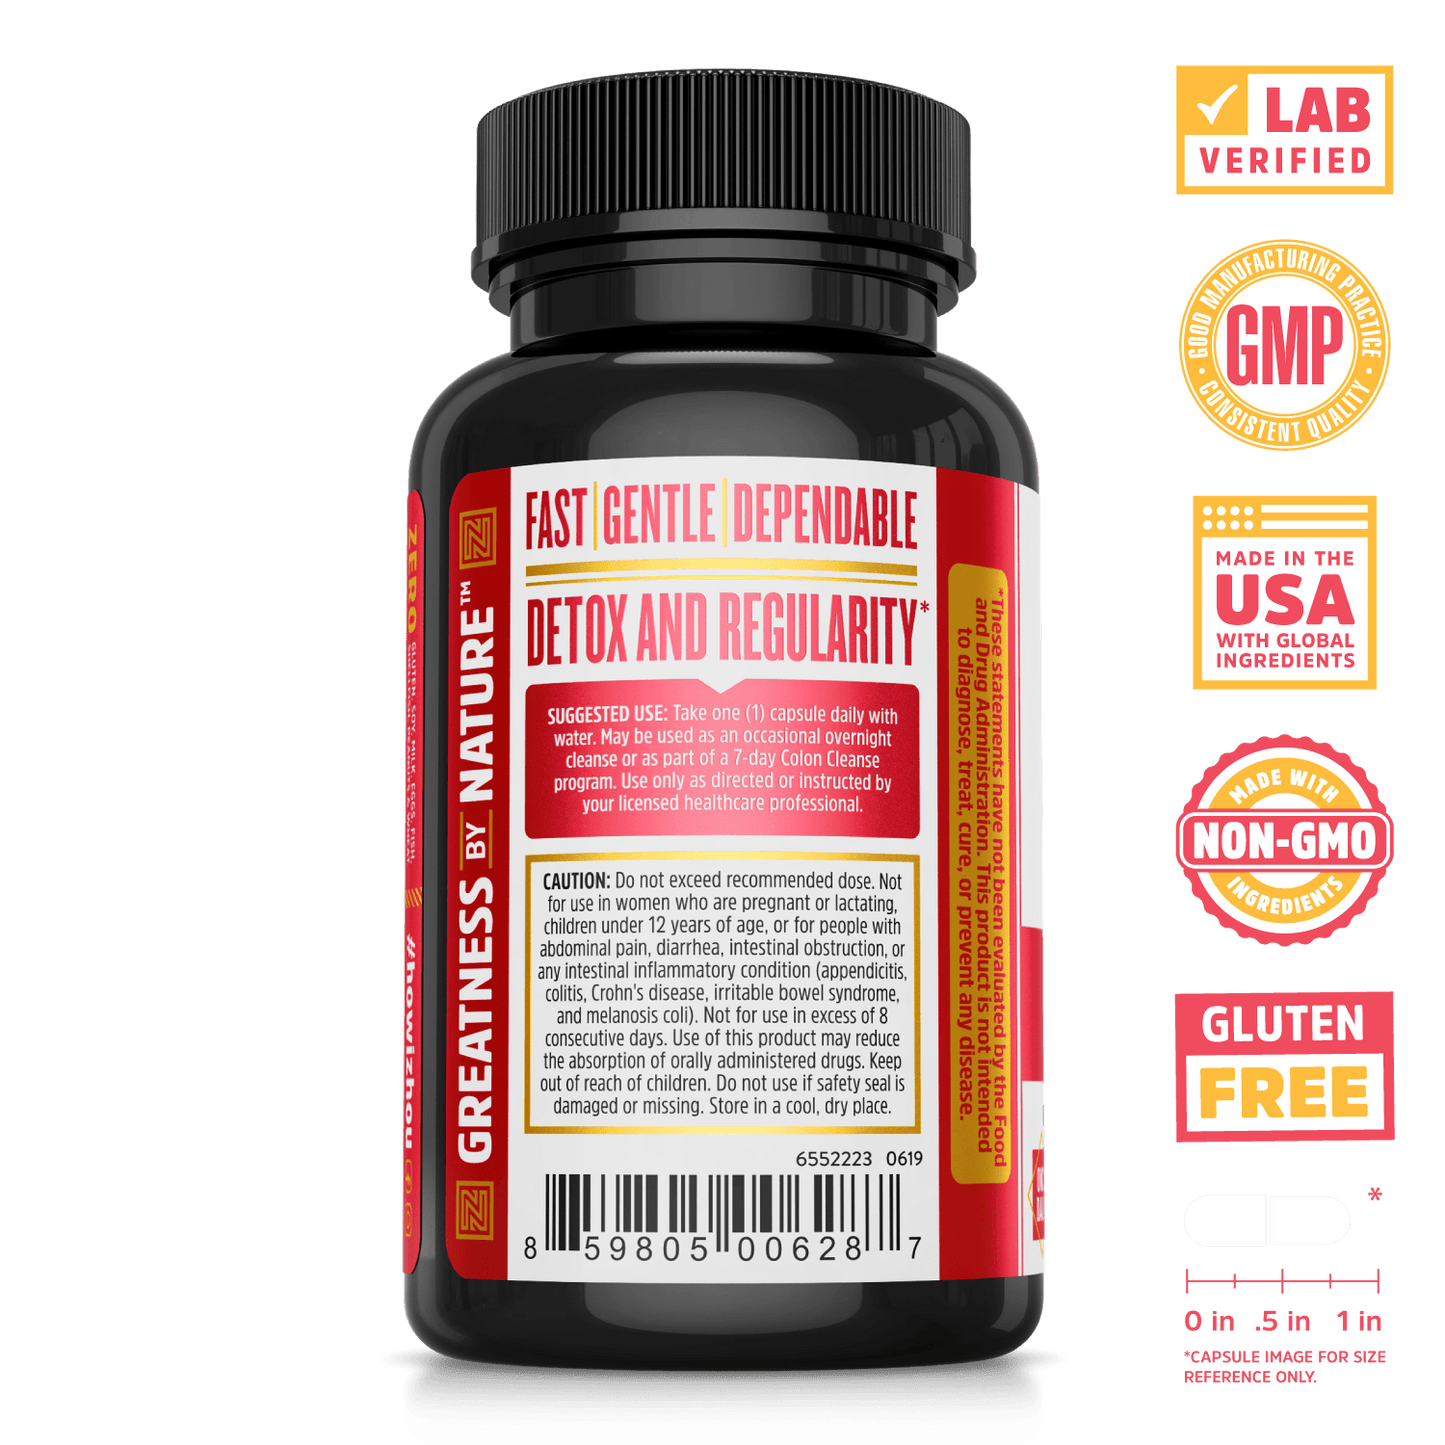 Zhou Nutrition Pro-Clenz Colon Detox Cleanse.  Lab verified, good manufacturing practices, made in the USA with global ingredients, made with non-GMO ingredients, gluten free.